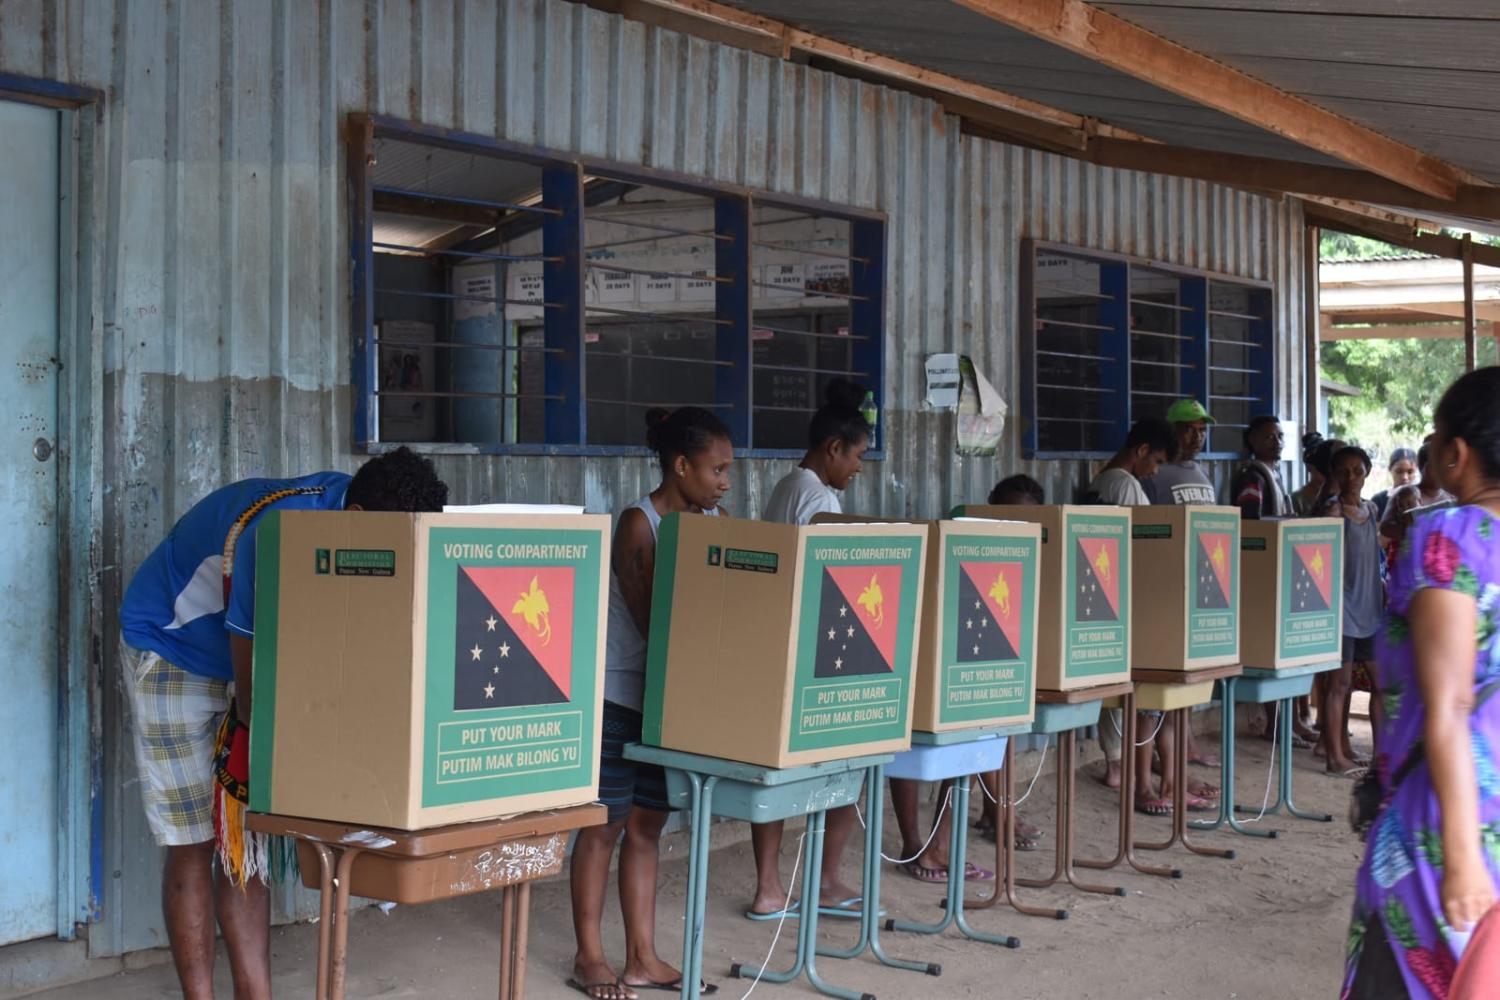 Voting in the 2022 PNG election (The Commonwealth/Flickr)